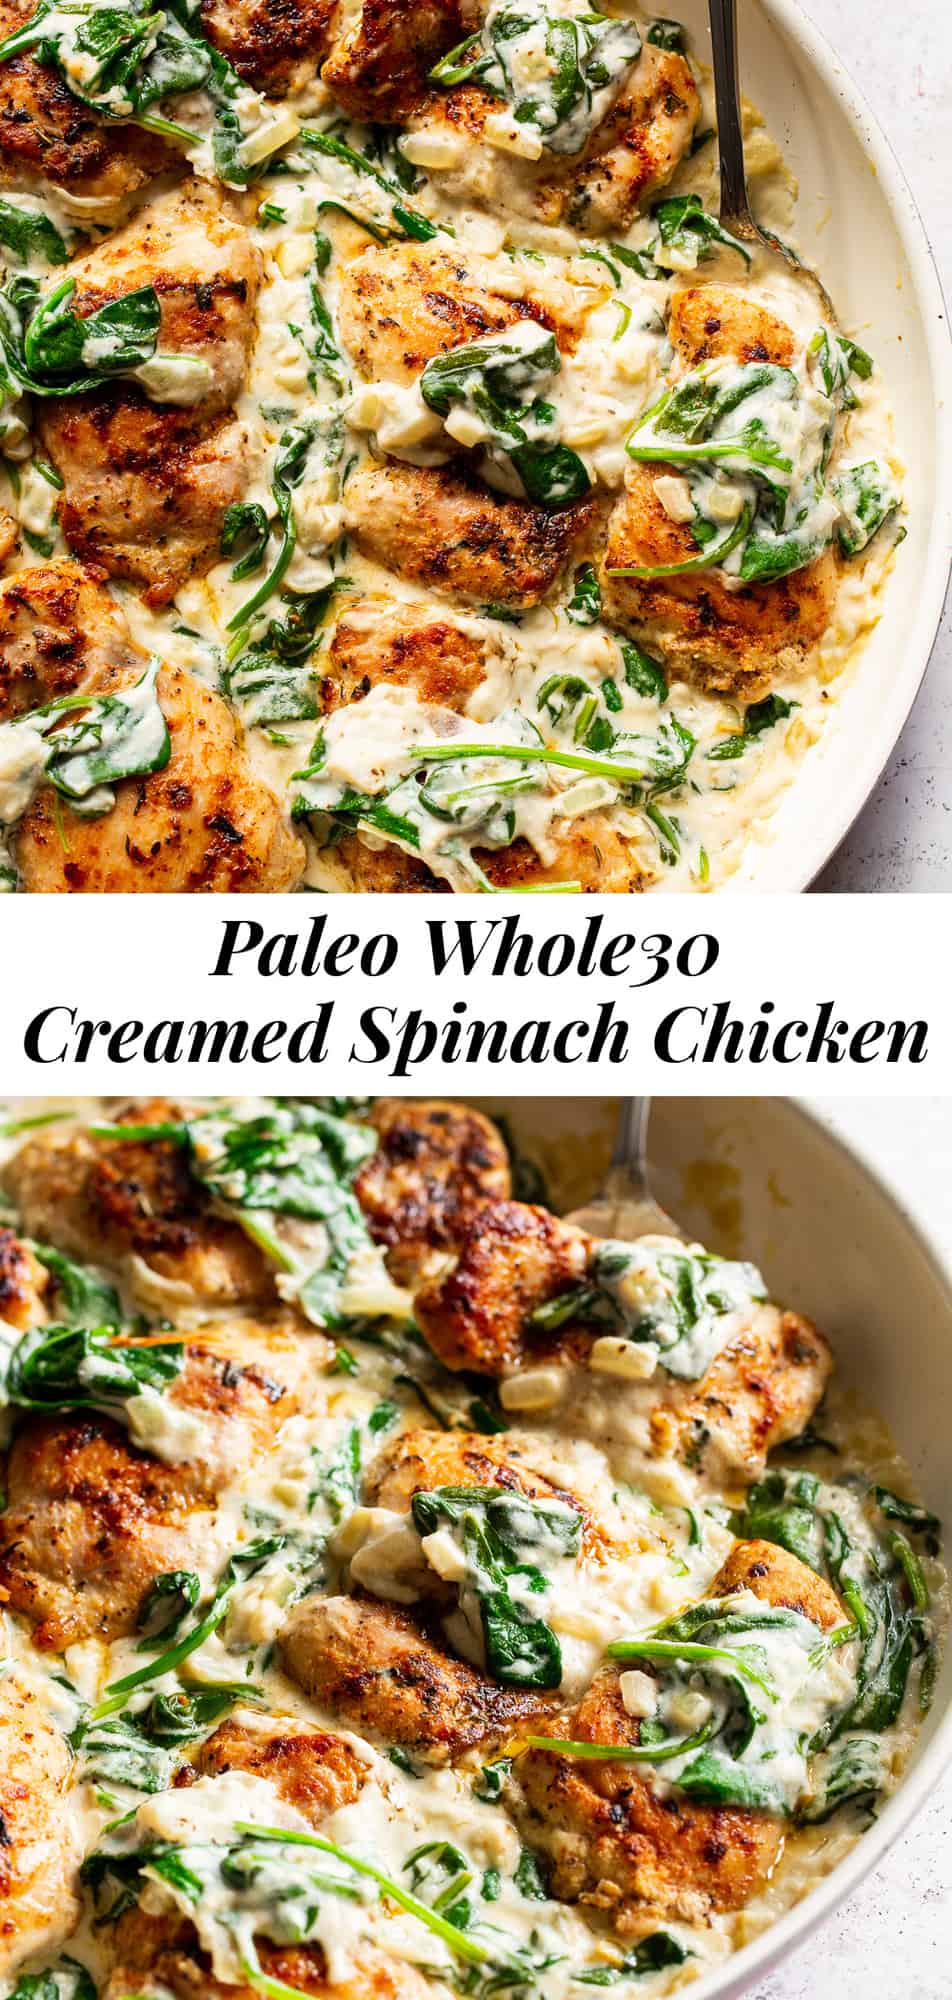 This one pot creamed spinach chicken is paleo, Whole30 friendly and dairy free but you’d never guess! Juicy seasoned chicken is cooked in one skillet with a creamy, “cheesy” sauce and spinach that’s easy and great for weeknights! The leftovers are perfect for lunch the next day too. #paleo #whole30 #keto #cleaneating 